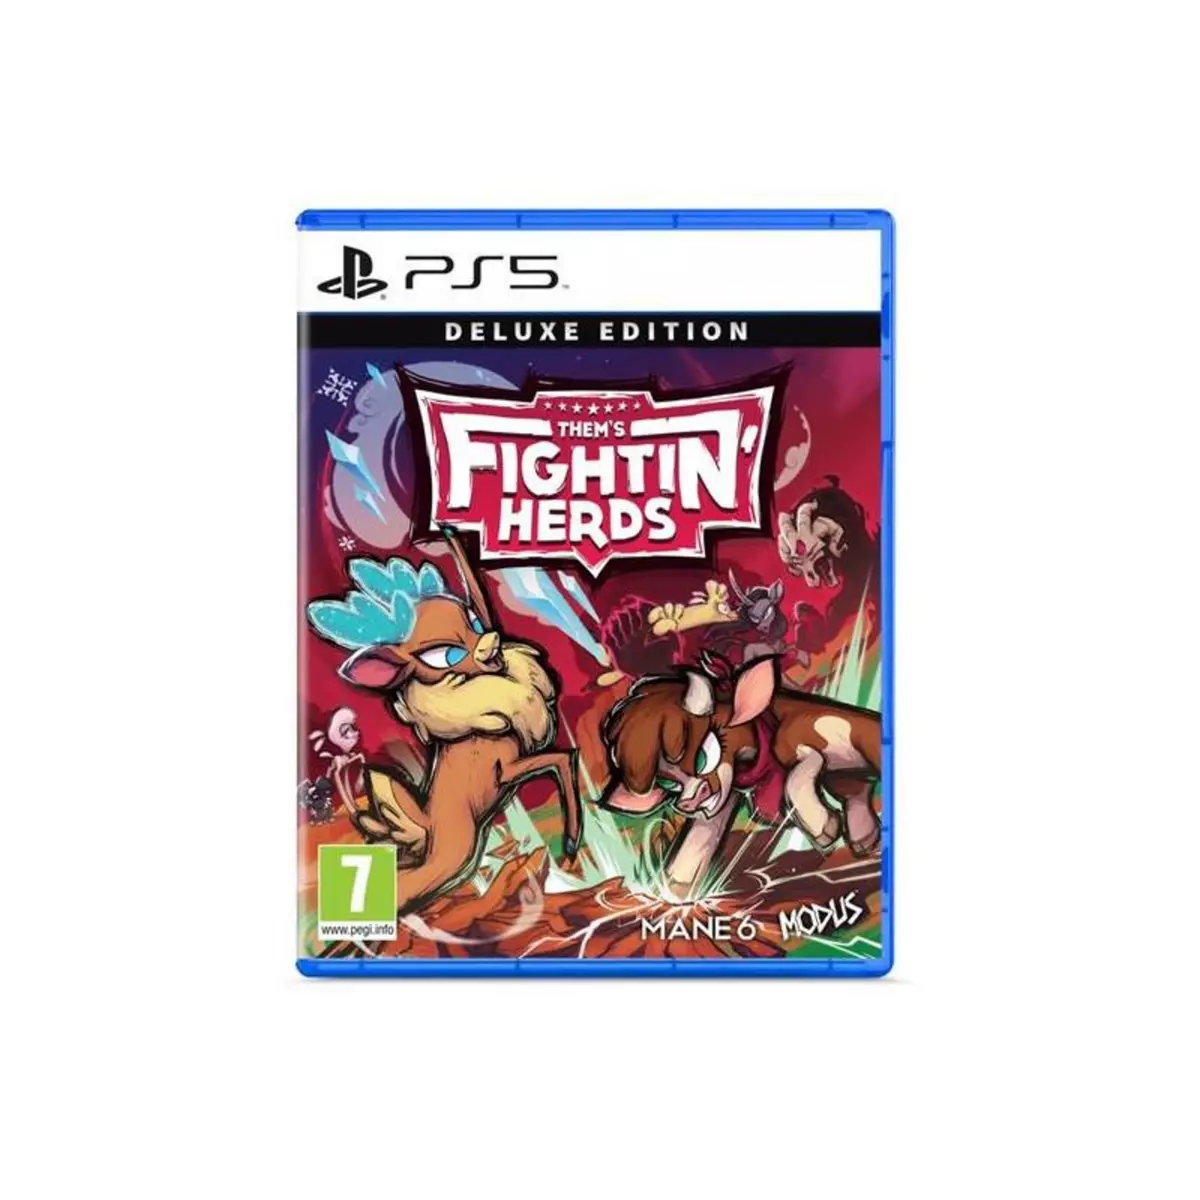 Just for games Them s Fightin Herds Edition Deluxe PS5